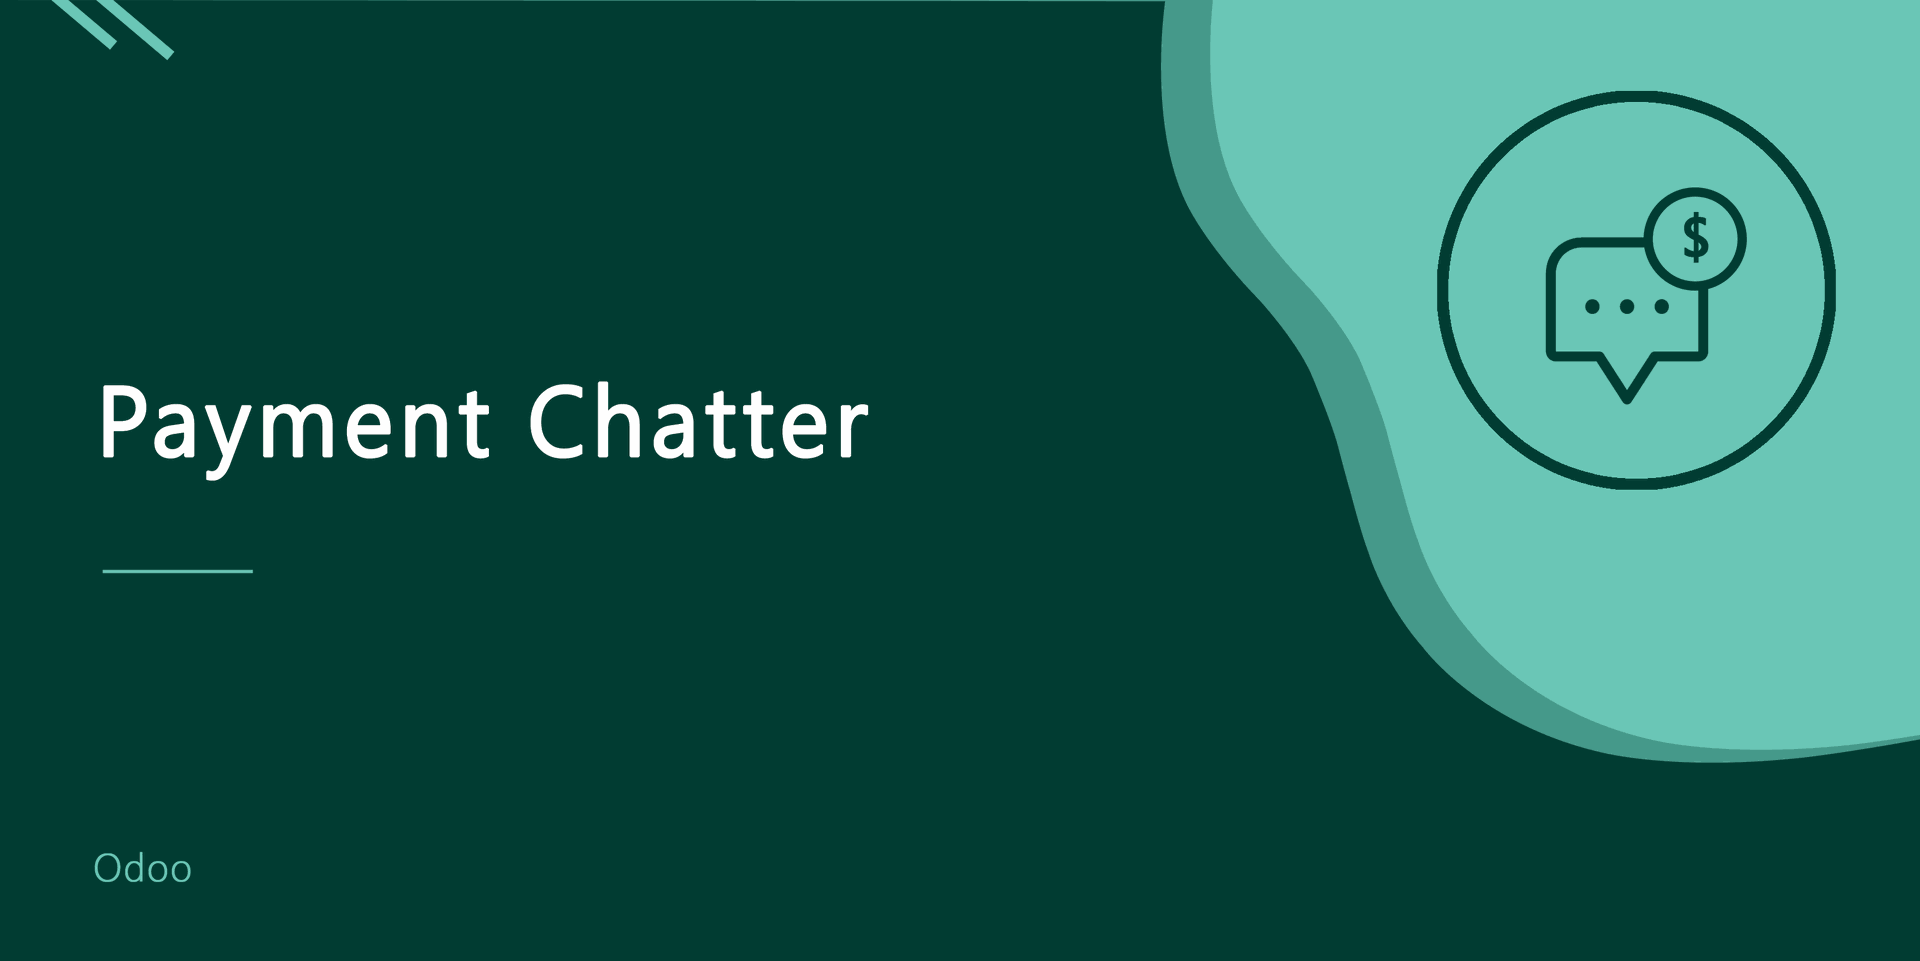 Payment Chatter